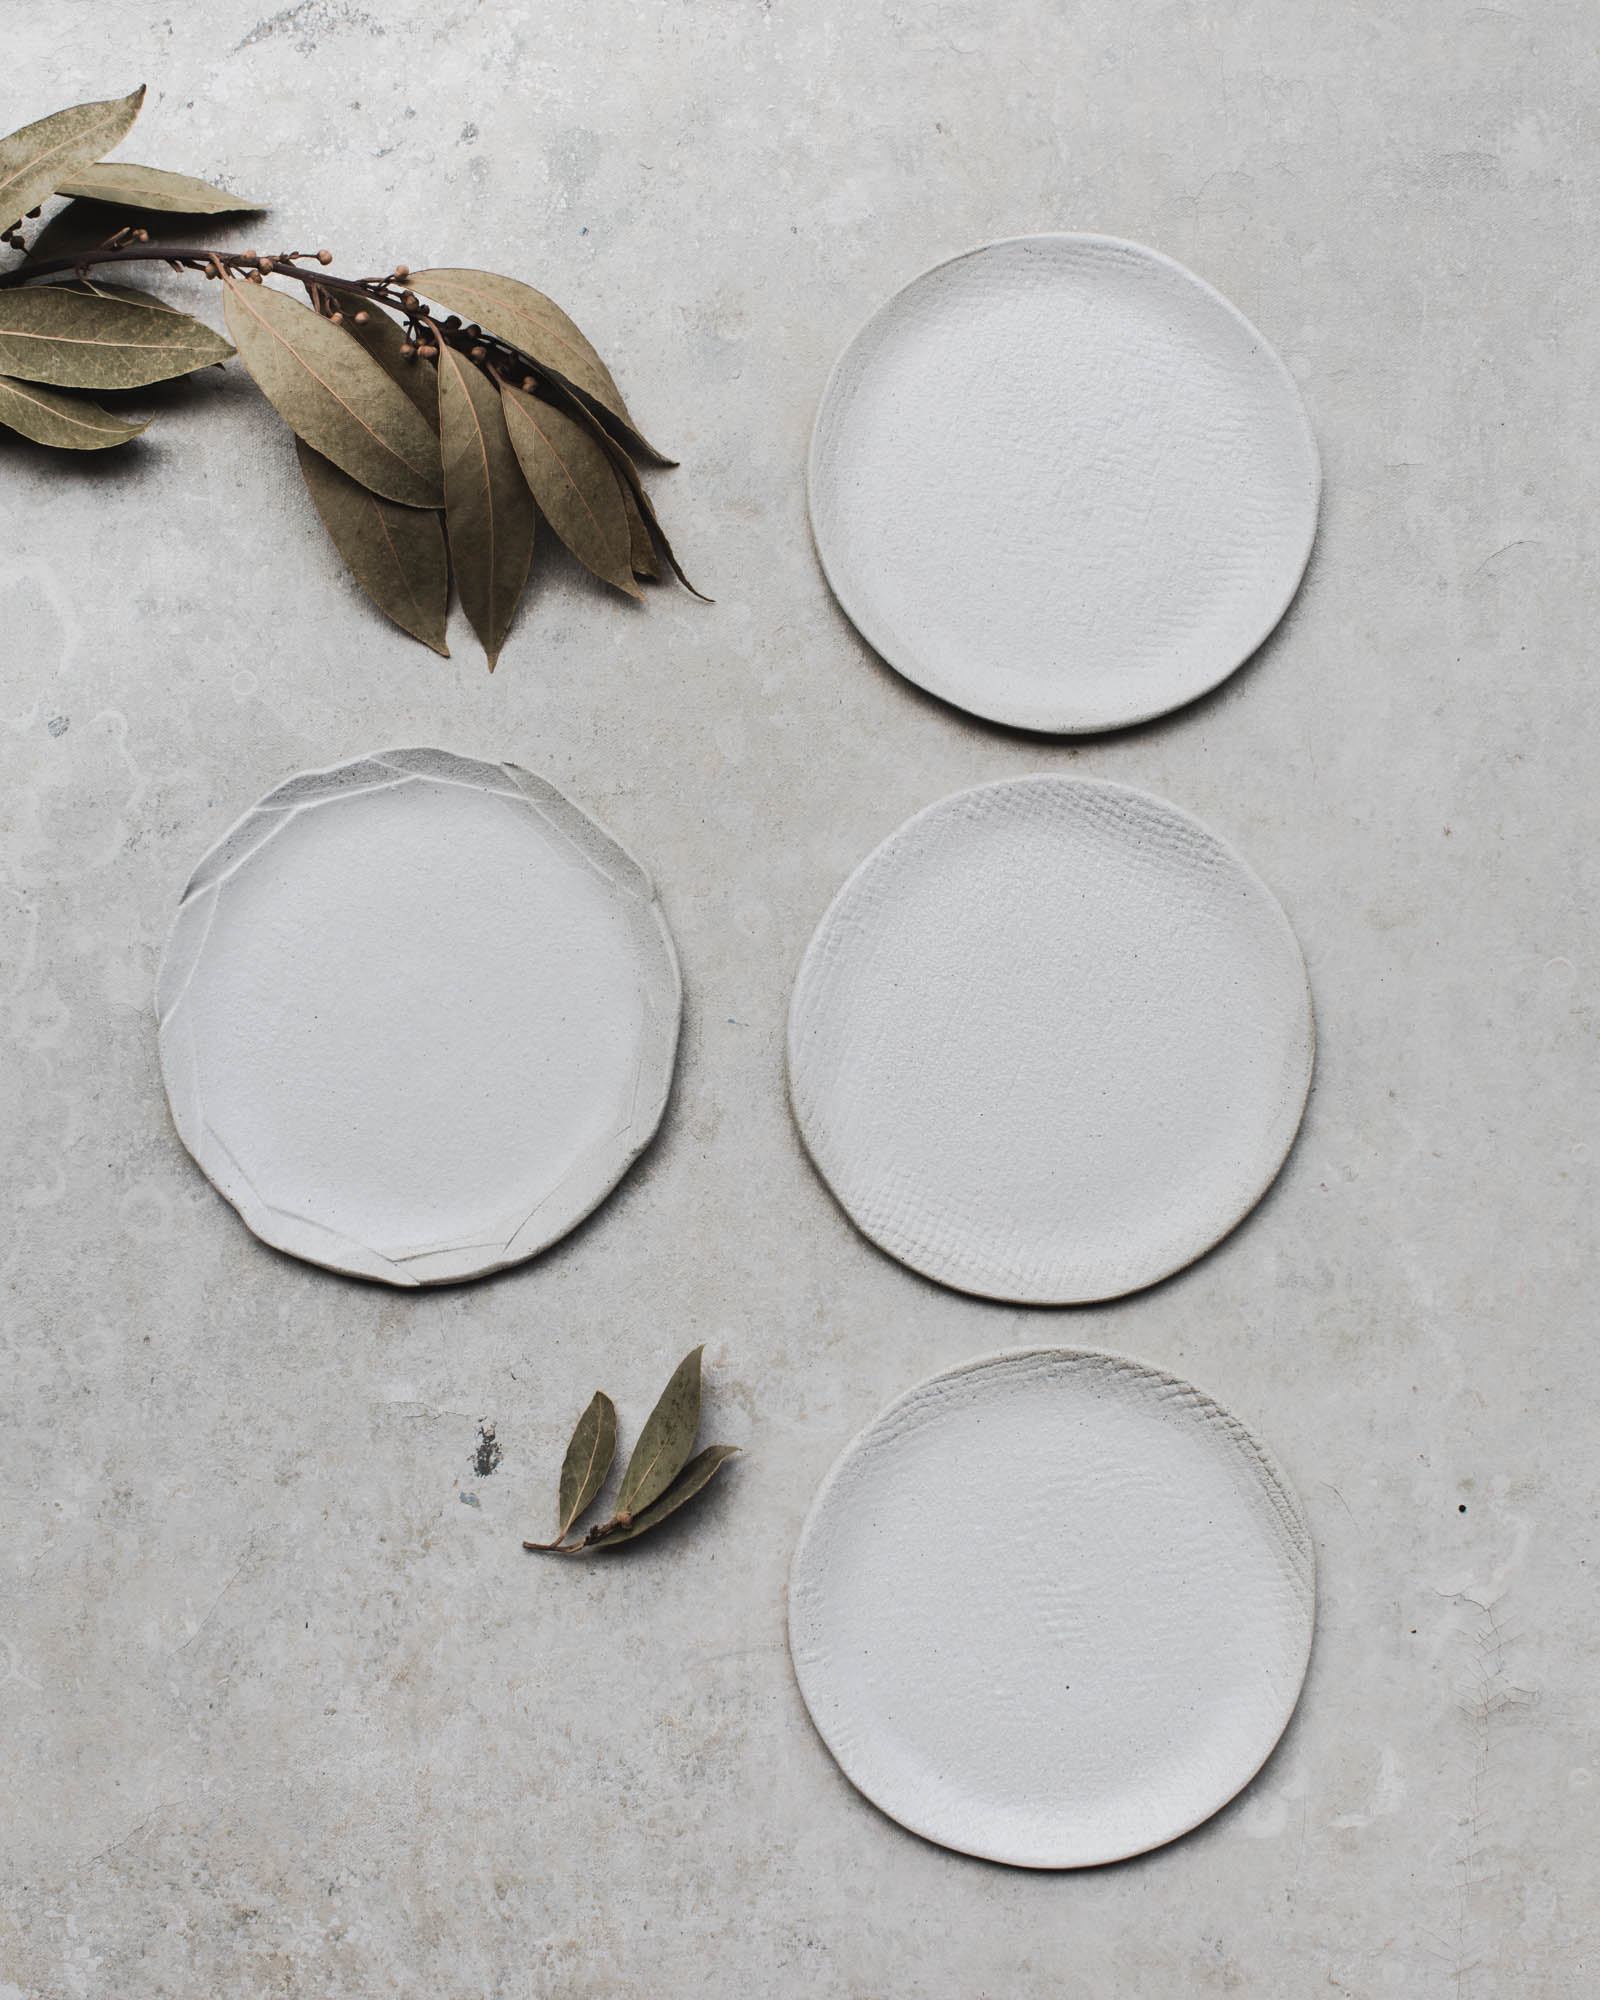 Matte white sandy textured handmade plates by clay beehive